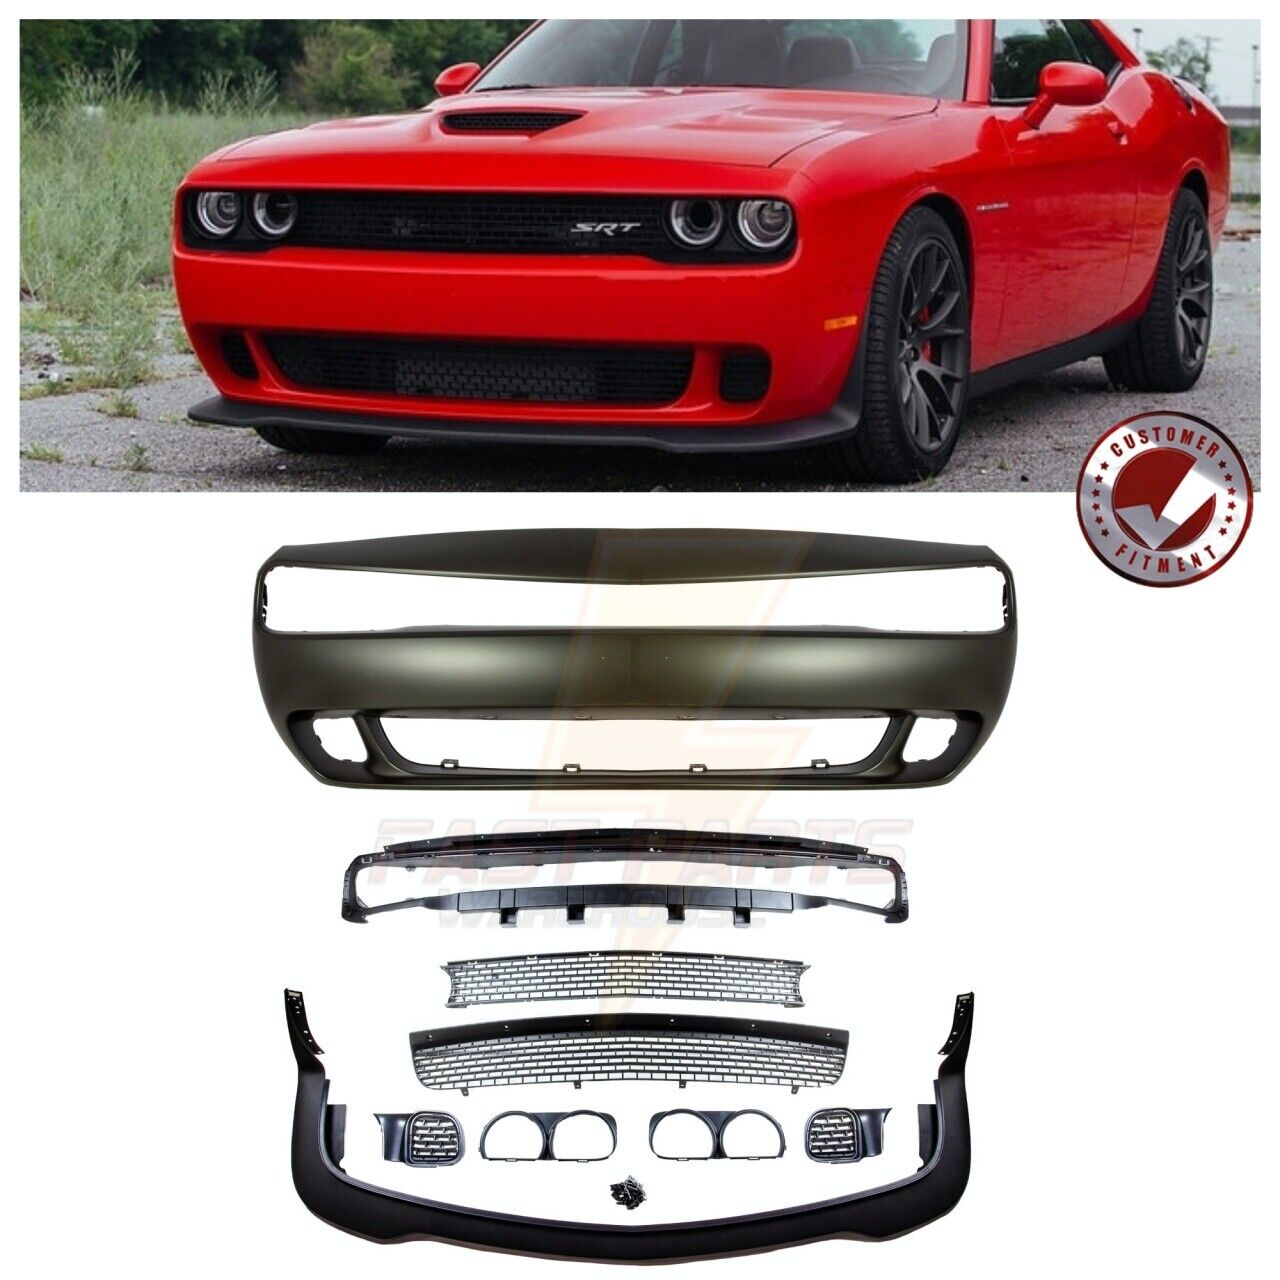 2015-19 DODGE CHALLENGER HELLCAT STYLE FRONT BUMPER COMPLETE CONVERSION KIT